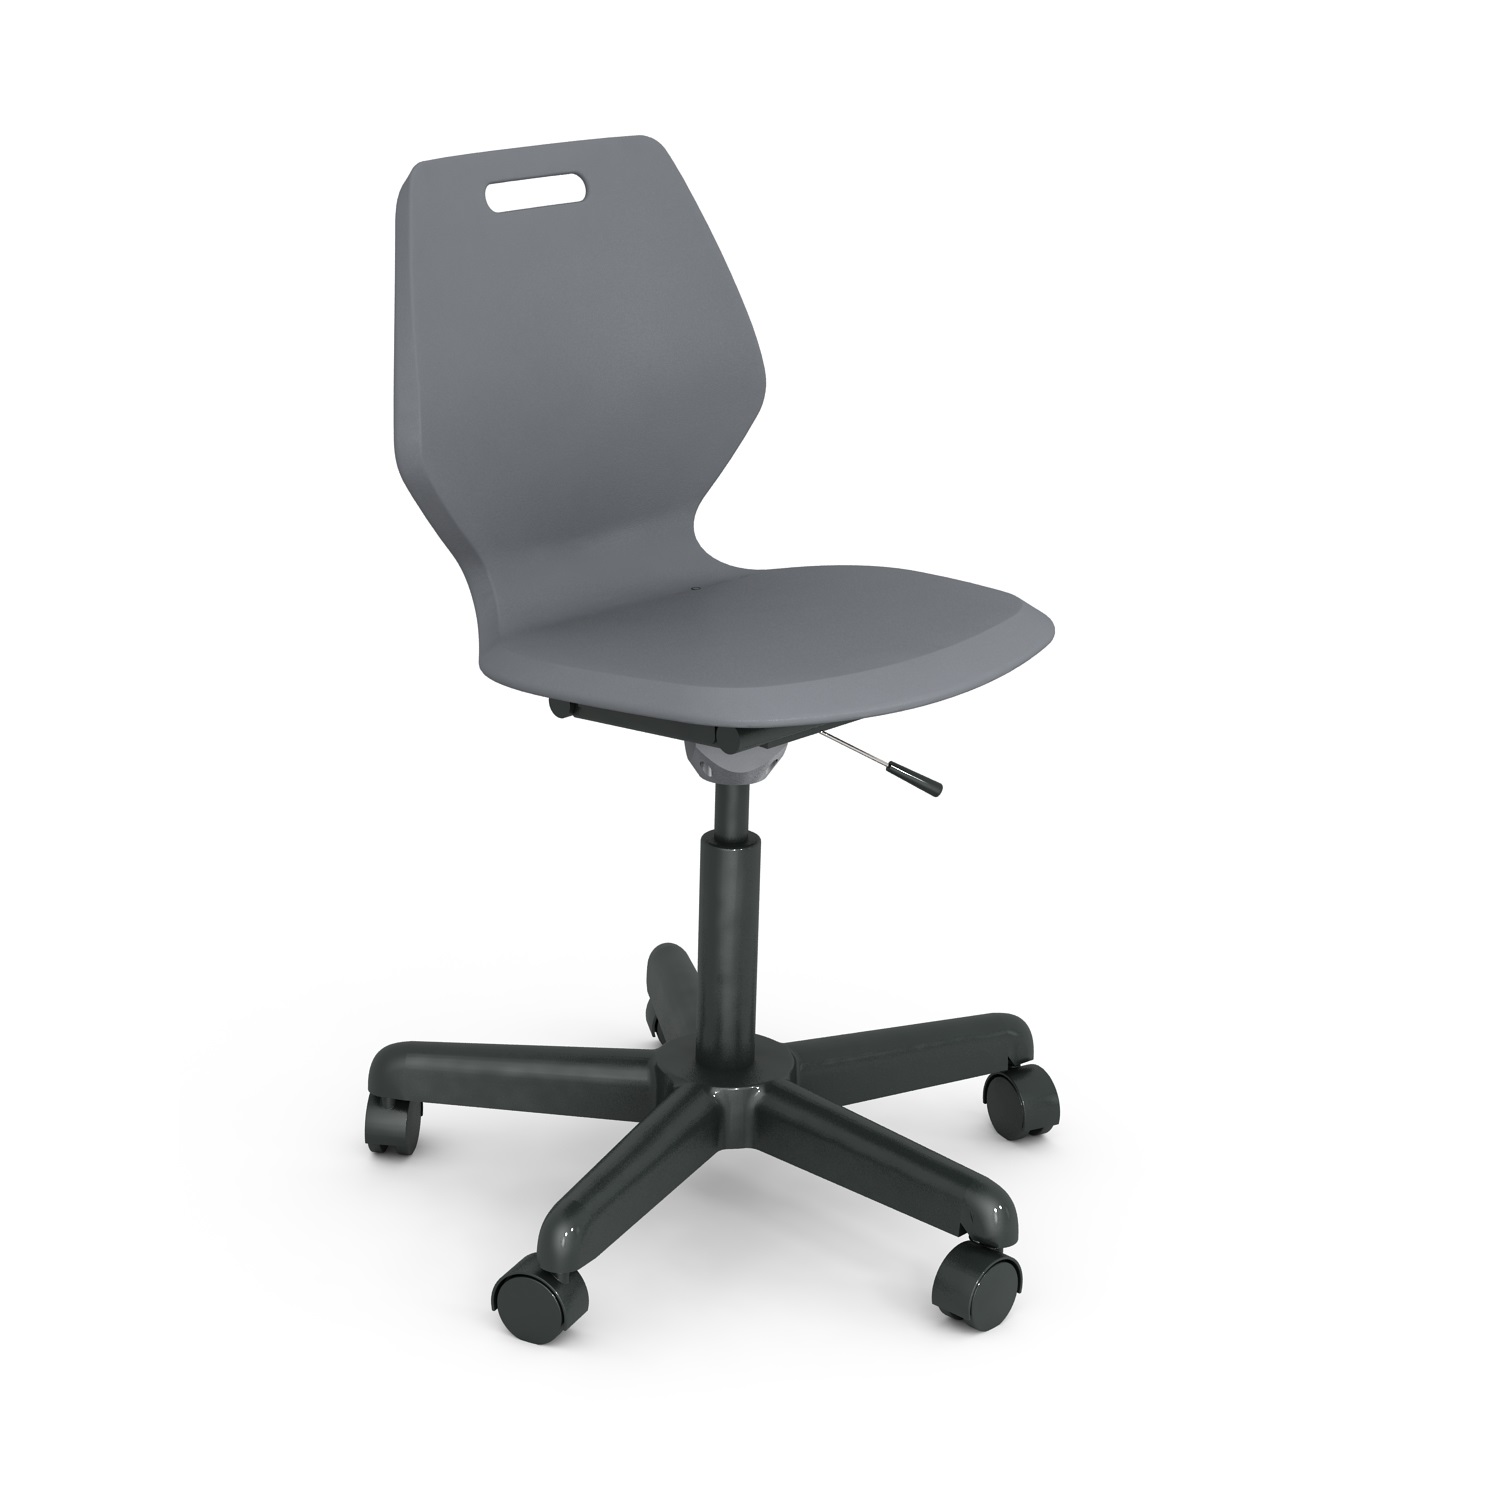 READY TASK CHAIR GRAY - PARAGON FURNITURE